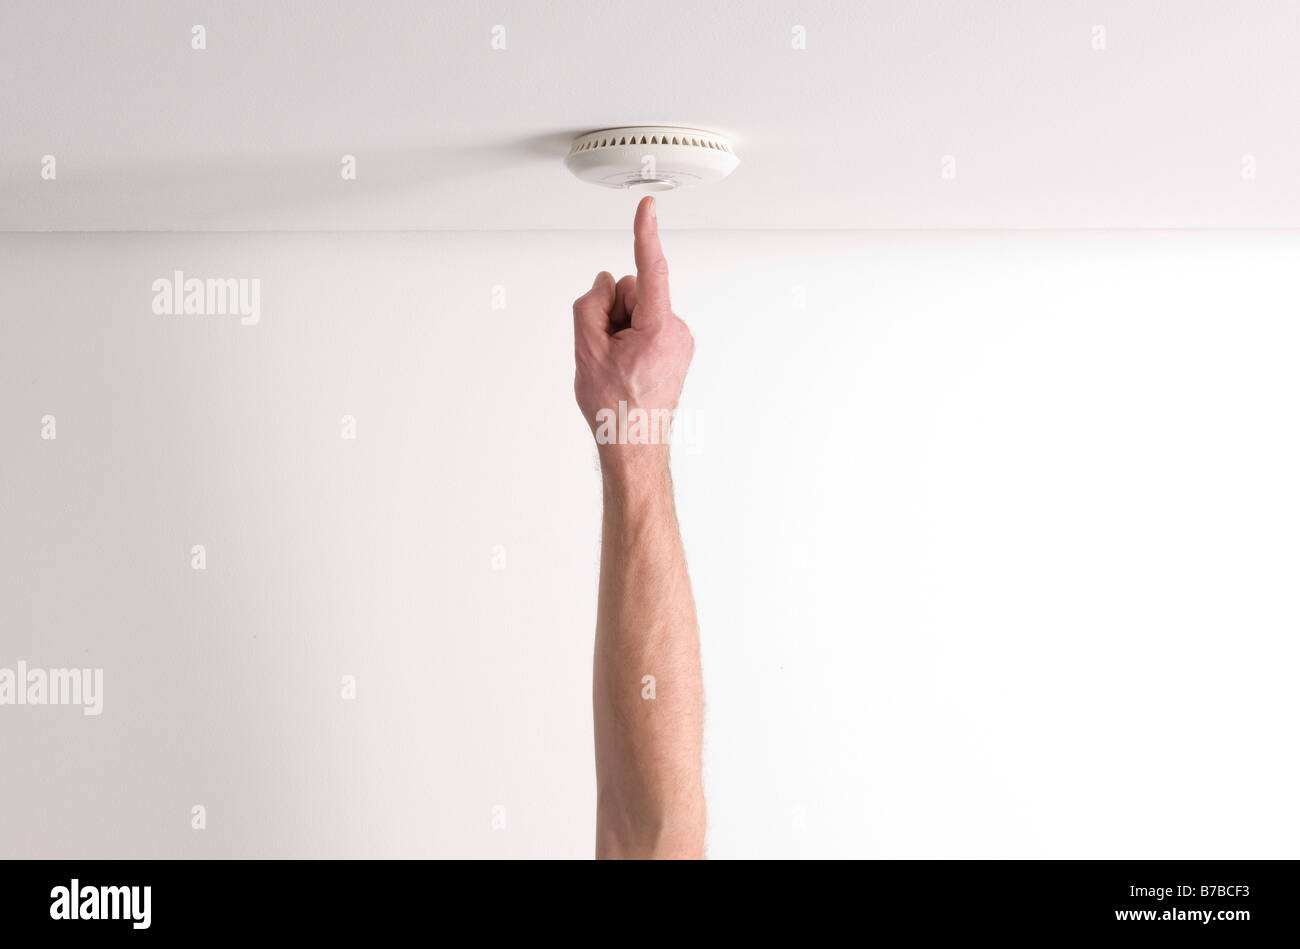 Man testing a domestic fire alarm is working correctly Stock Photo